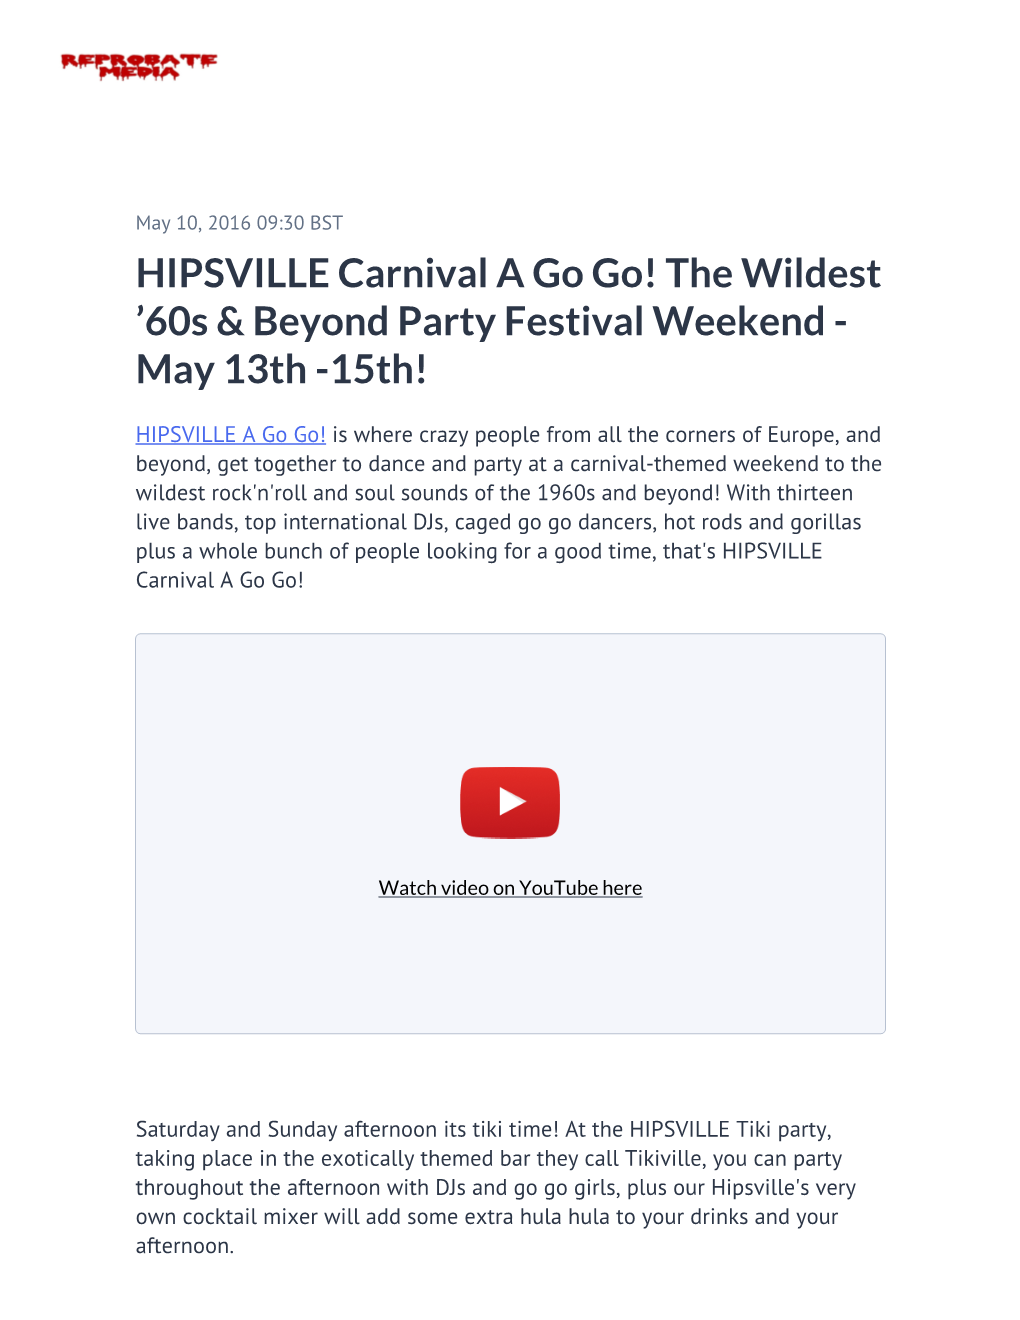 HIPSVILLE Carnival a Go Go! the Wildest '60S & Beyond Party